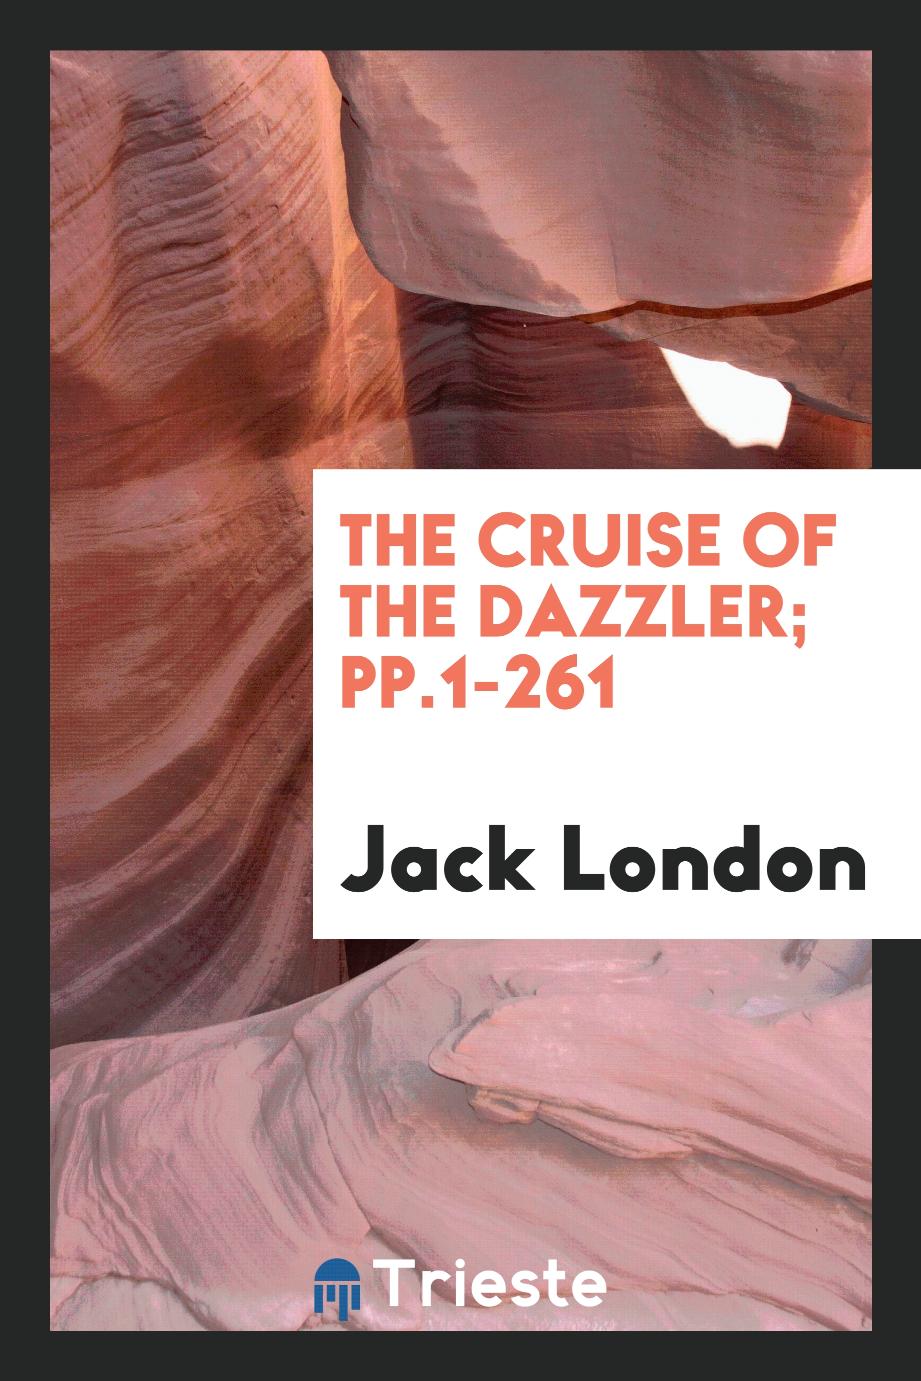 The Cruise of the Dazzler; pp.1-261